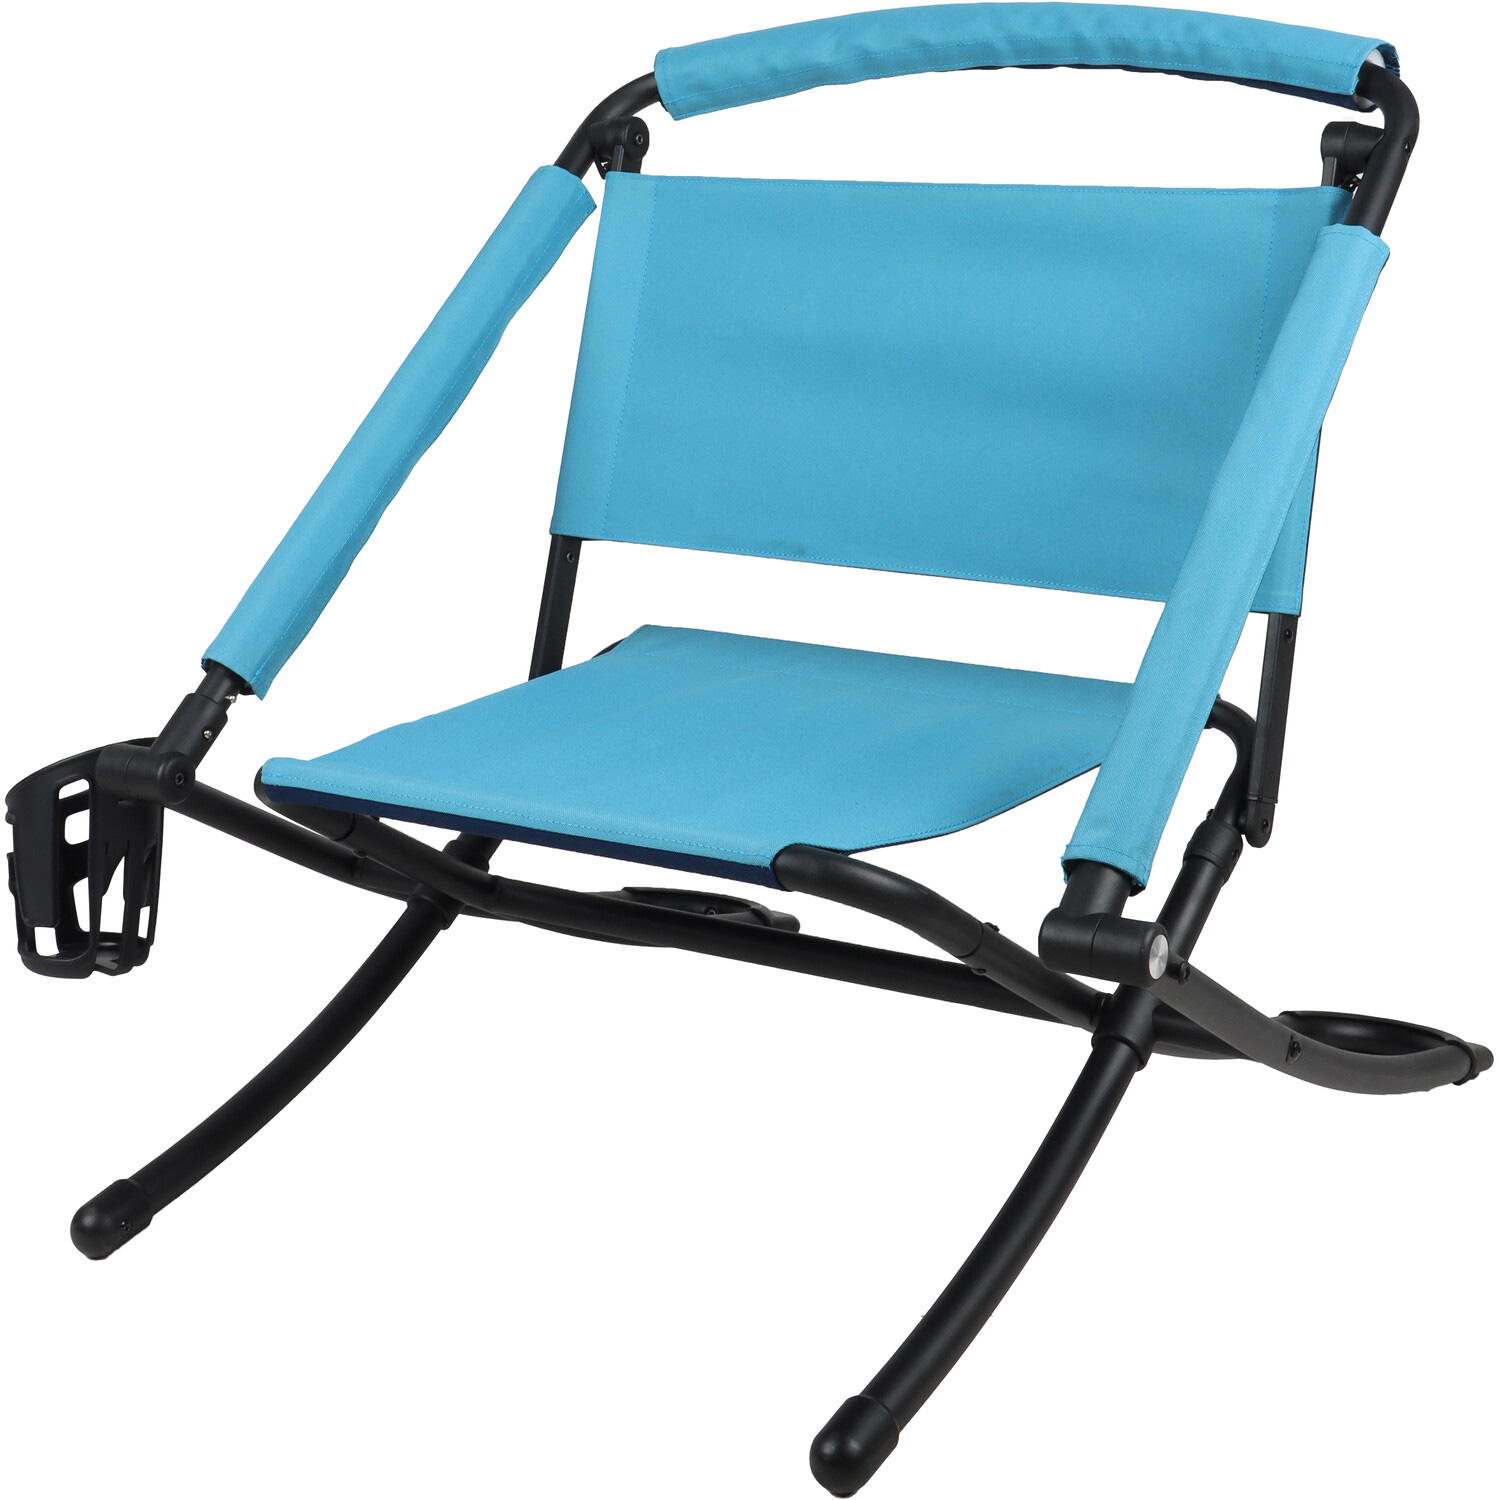 Multifunction Camping Chair Image 4